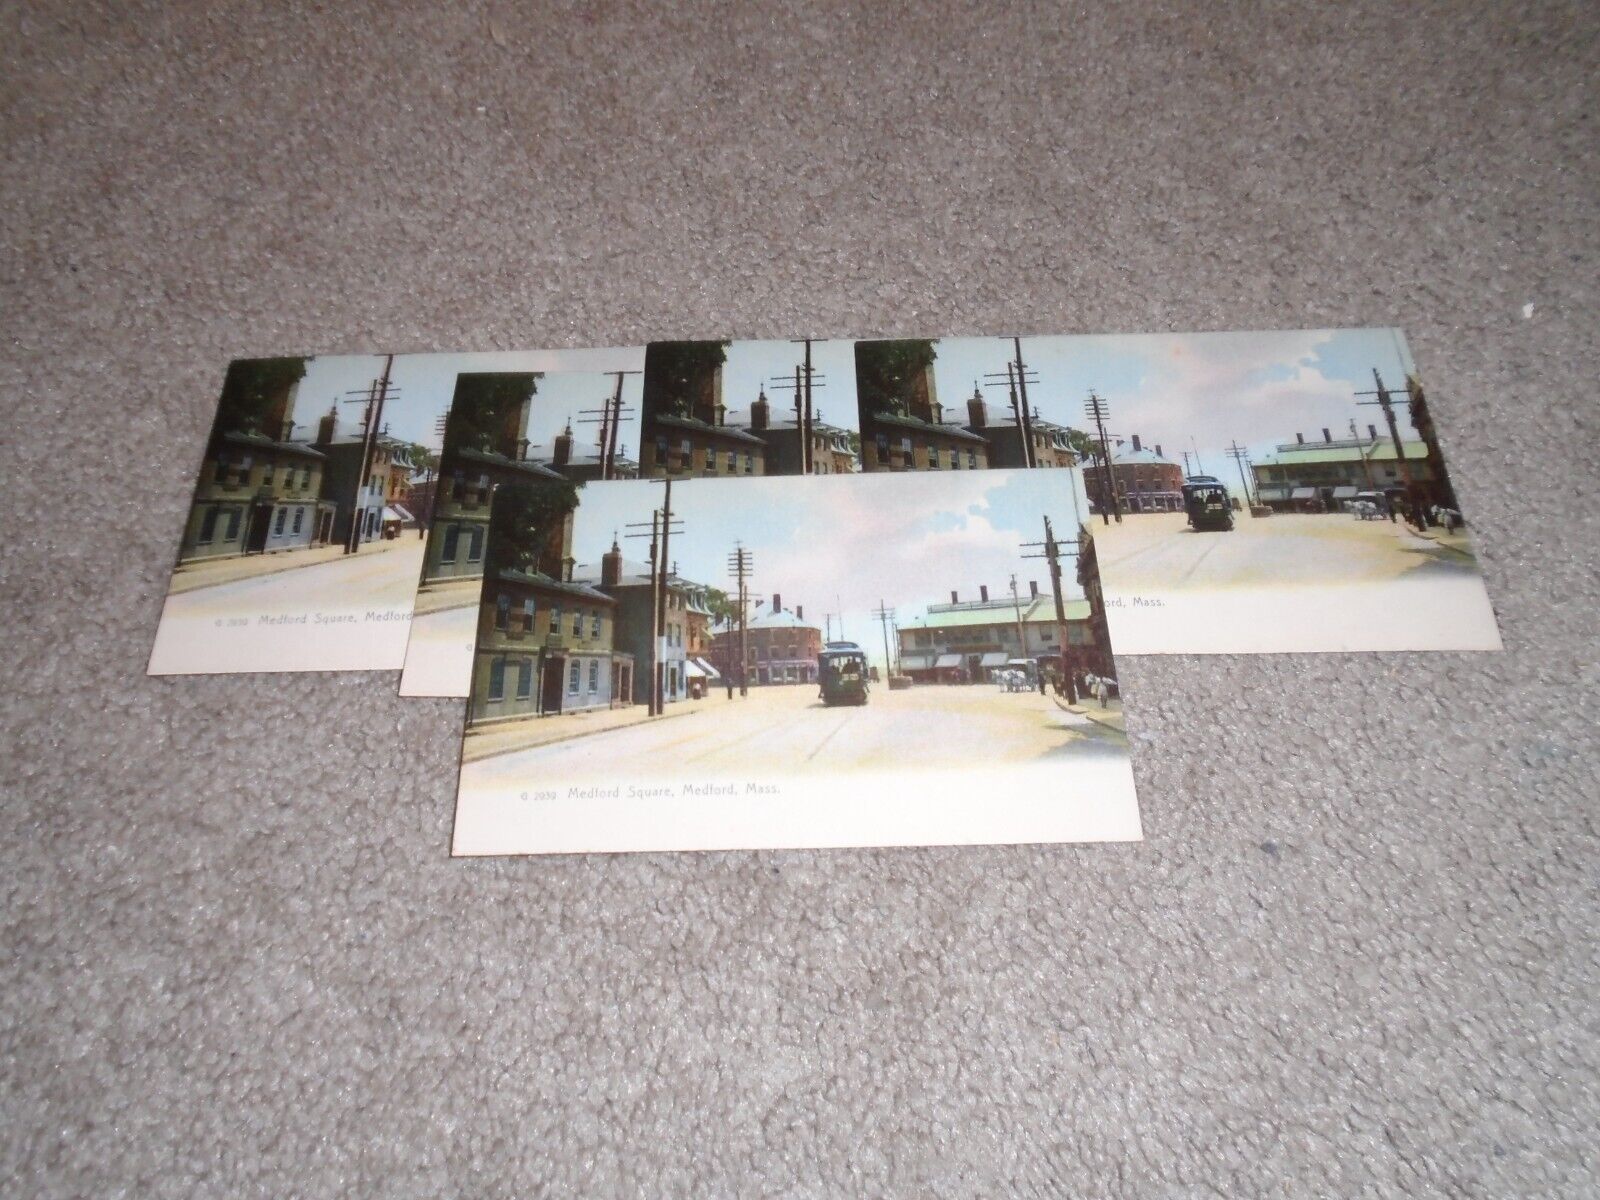 Lot of 5 Early Postcards Medford Square Medford MA, Trolley, Horses